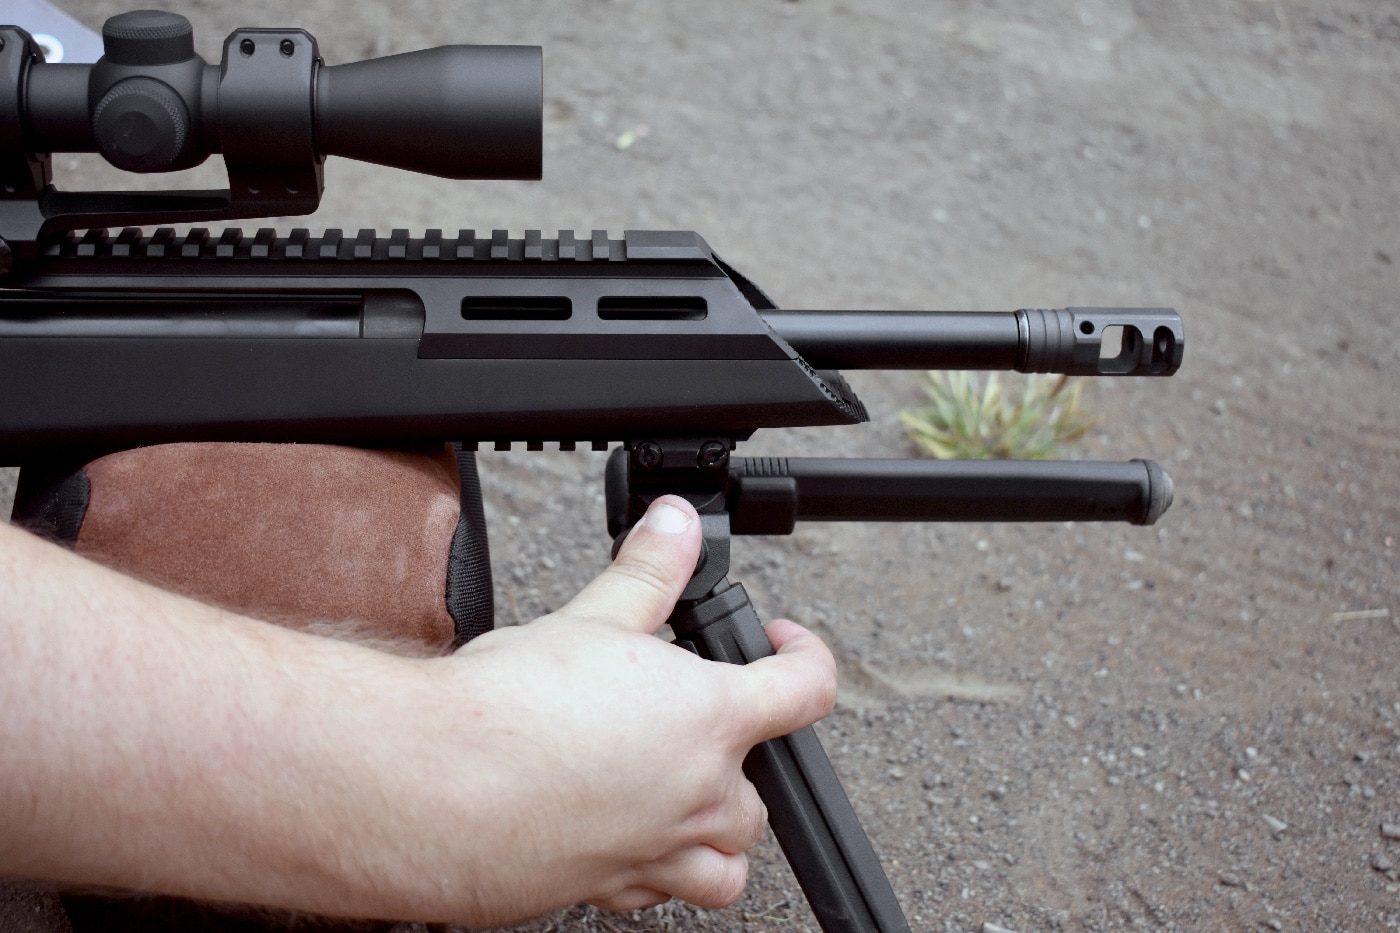 In this digital photograph from the author, we can see how the Magpul bipod allows for rifle movement to adjust the aiming point of the firearm.